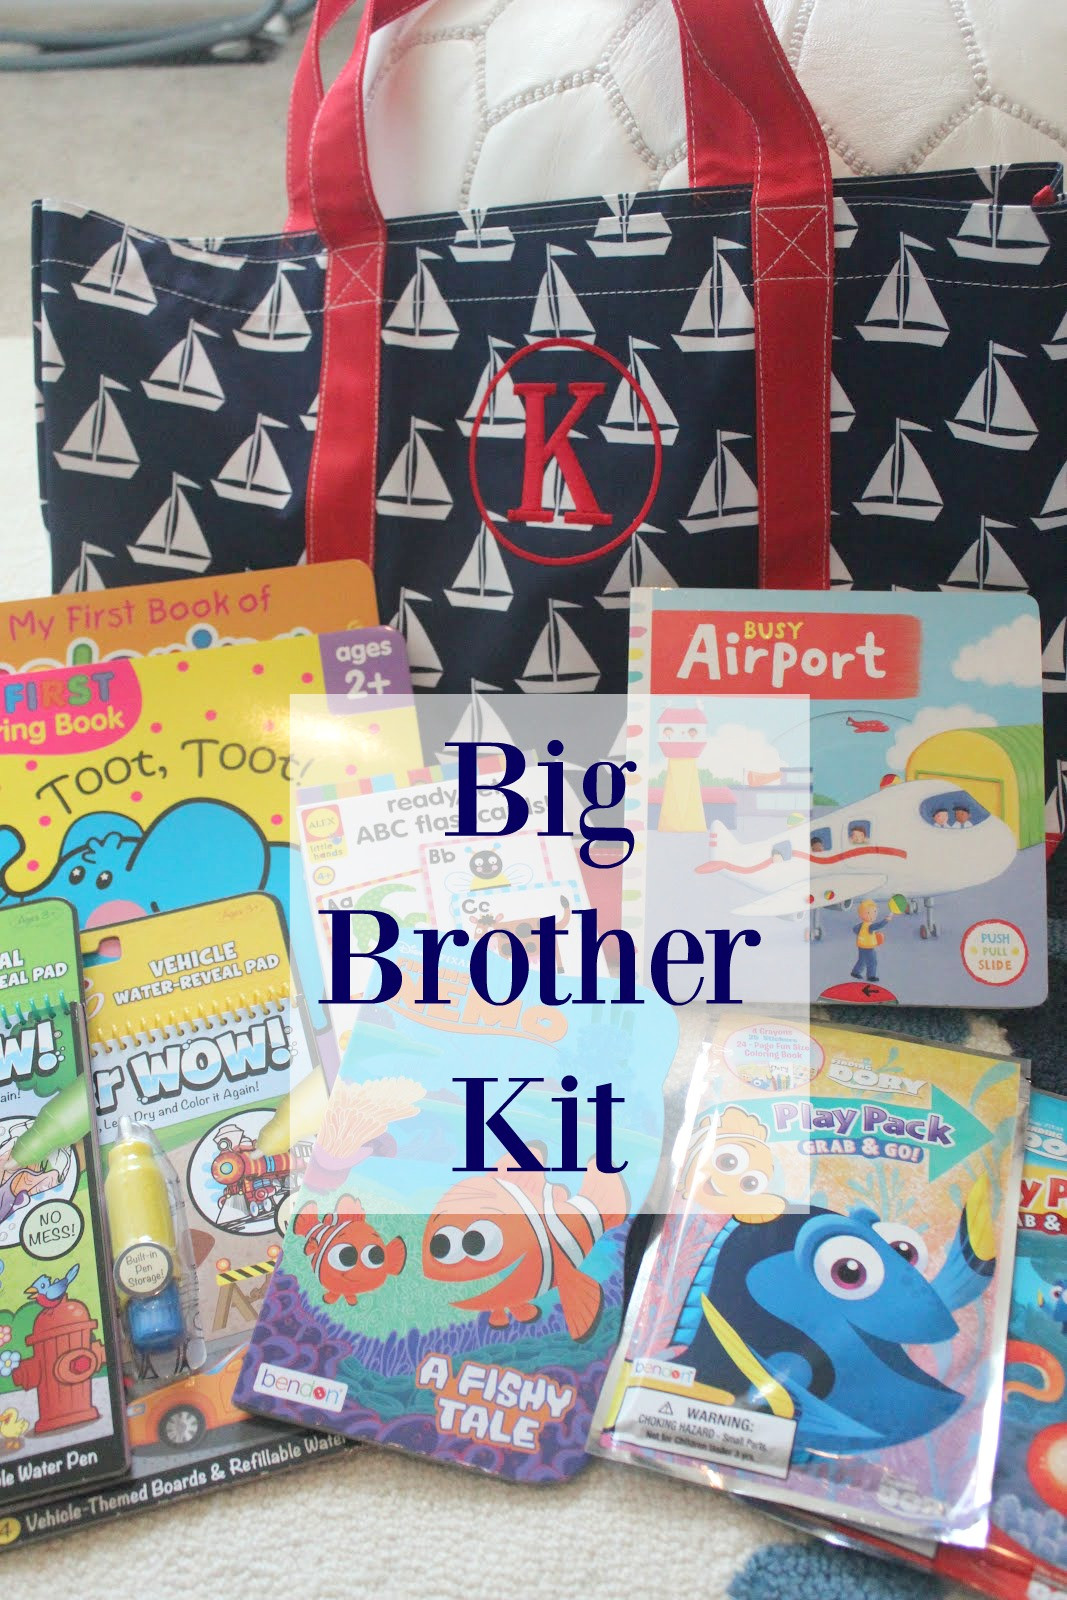 Big Brother Gift Ideas From Baby
 KEEP CALM AND CARRY ON Big Brother Kit